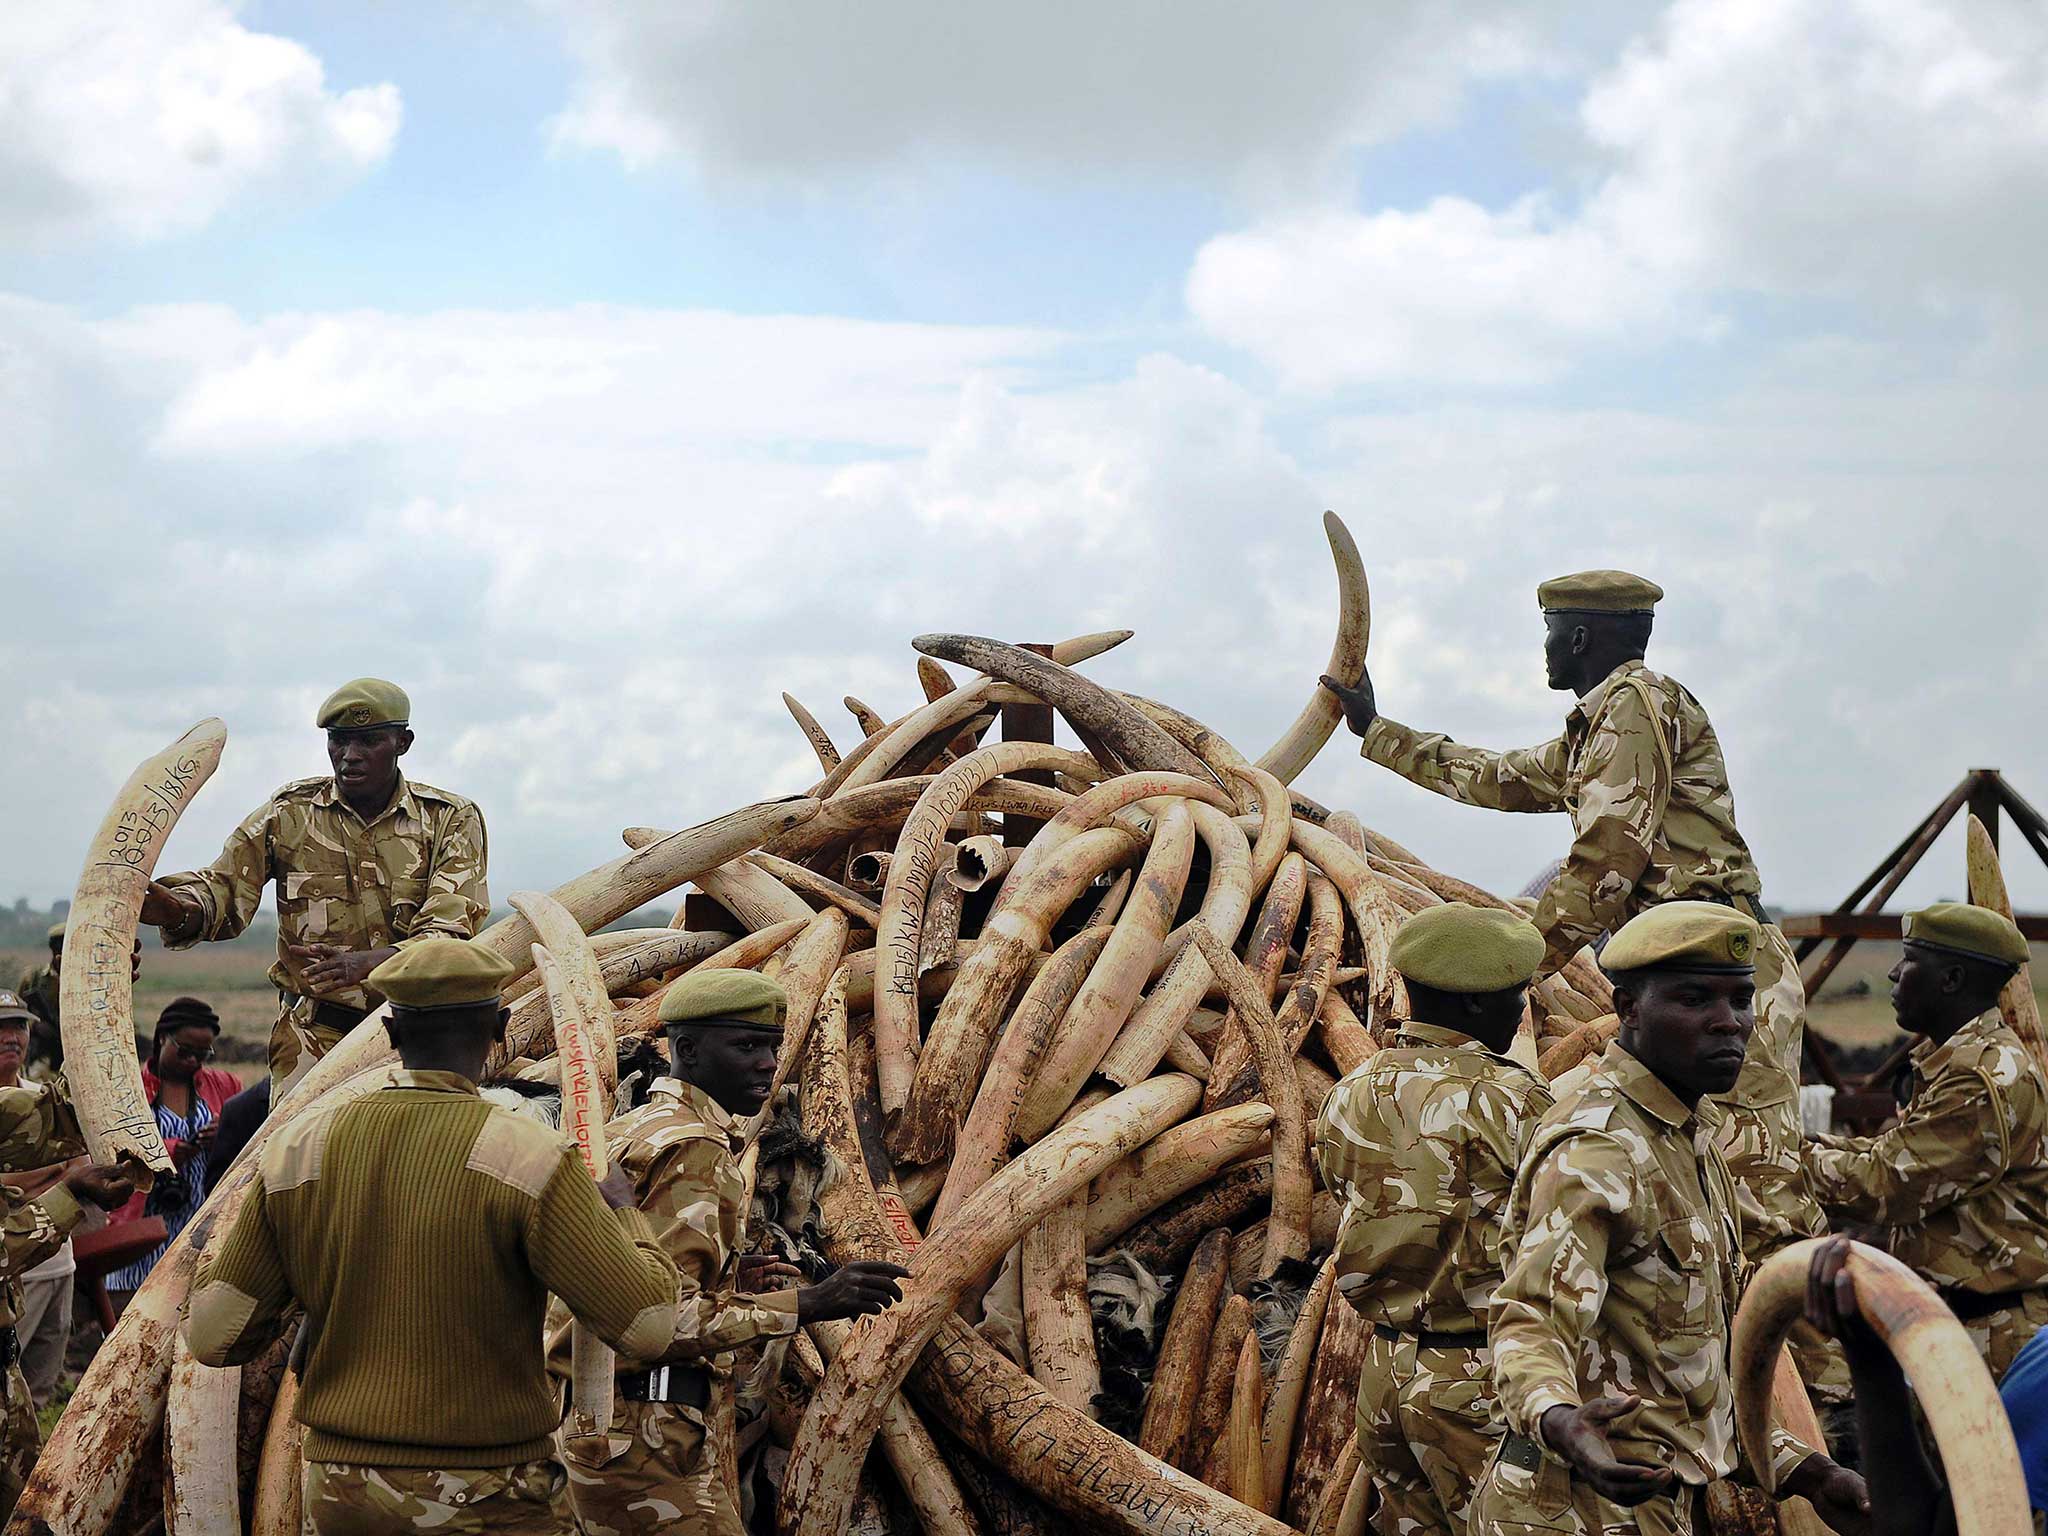 Kenya Wildlife Services (KWS) rangers pile up elephant ivory onto a pyre, at Nairobi's national park in preparation for a historic burning of tonnes of ivory